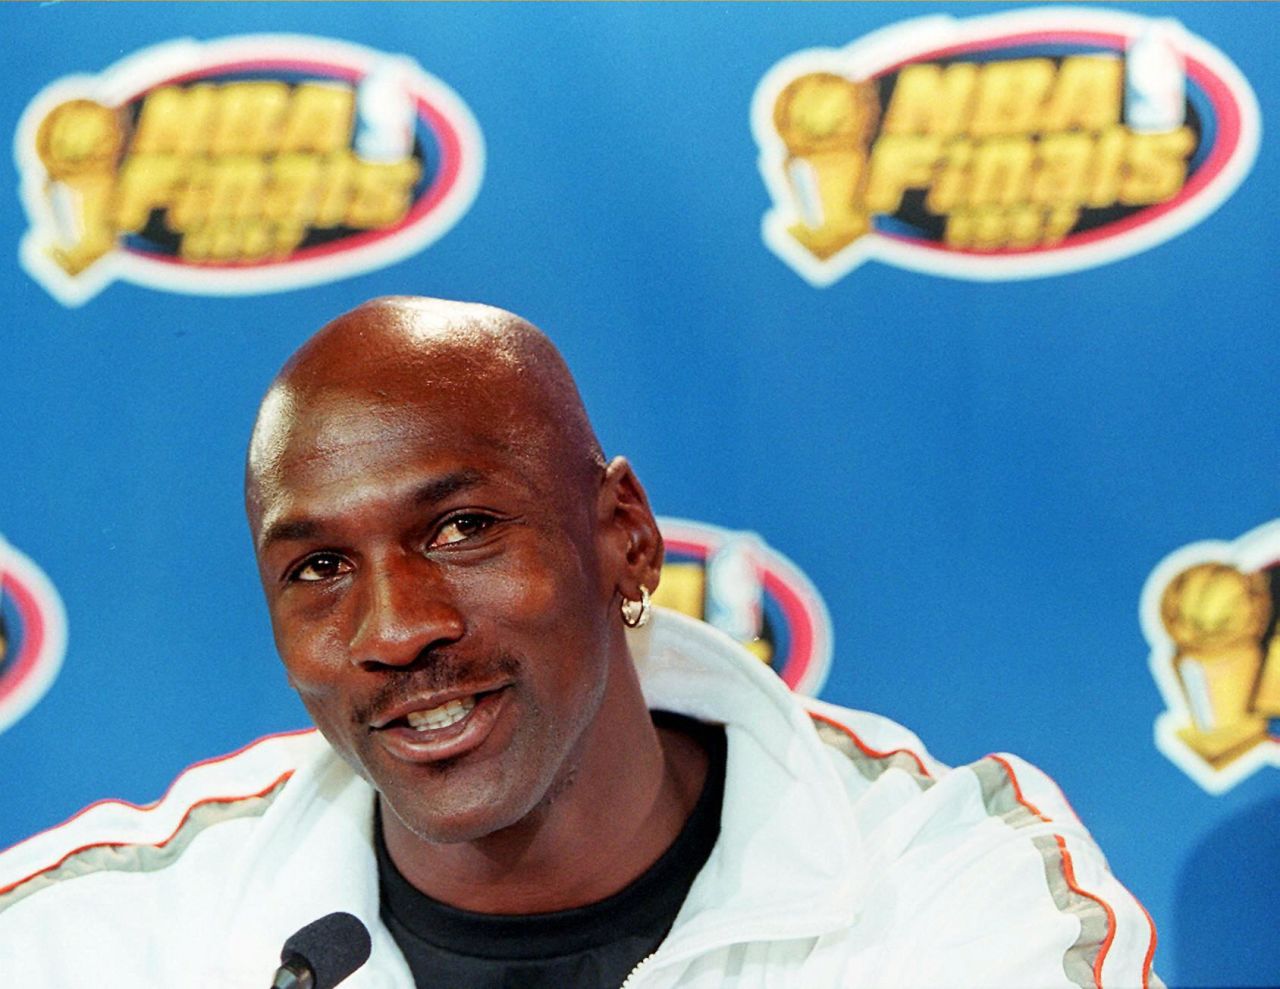 Michael Jordan's shaved head and gold earring was a staple of the '90s NBA look. 